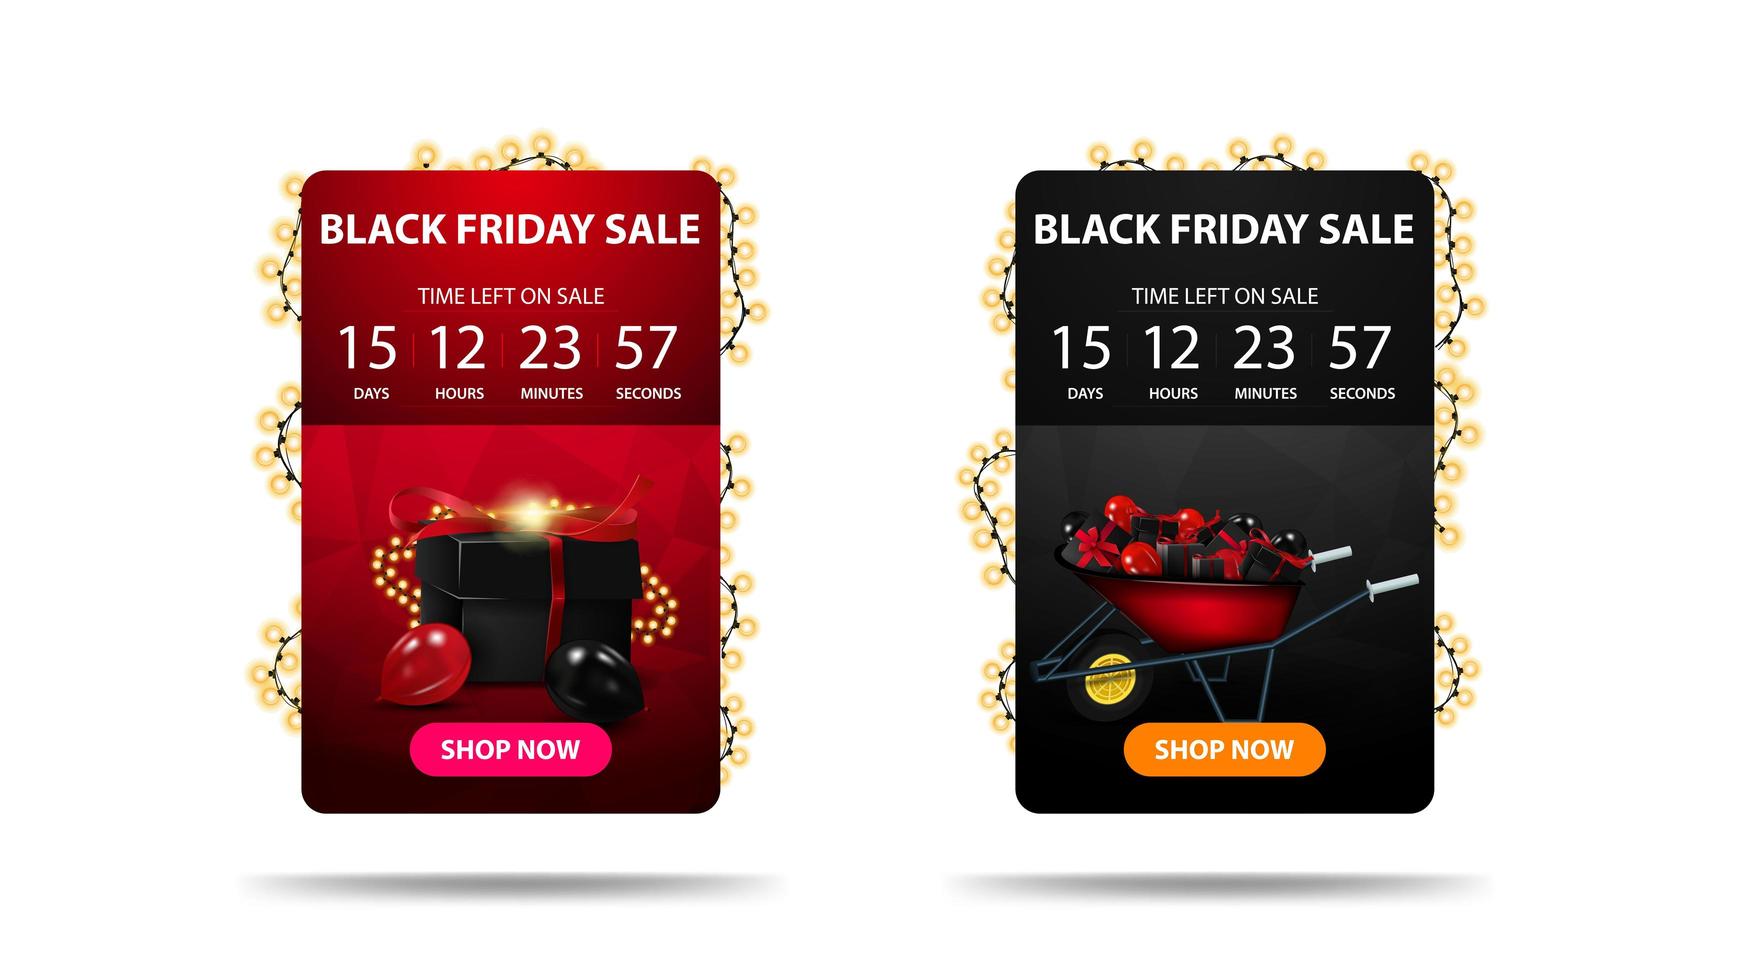 Black Friday Sale, discount banner with countdown timer vector